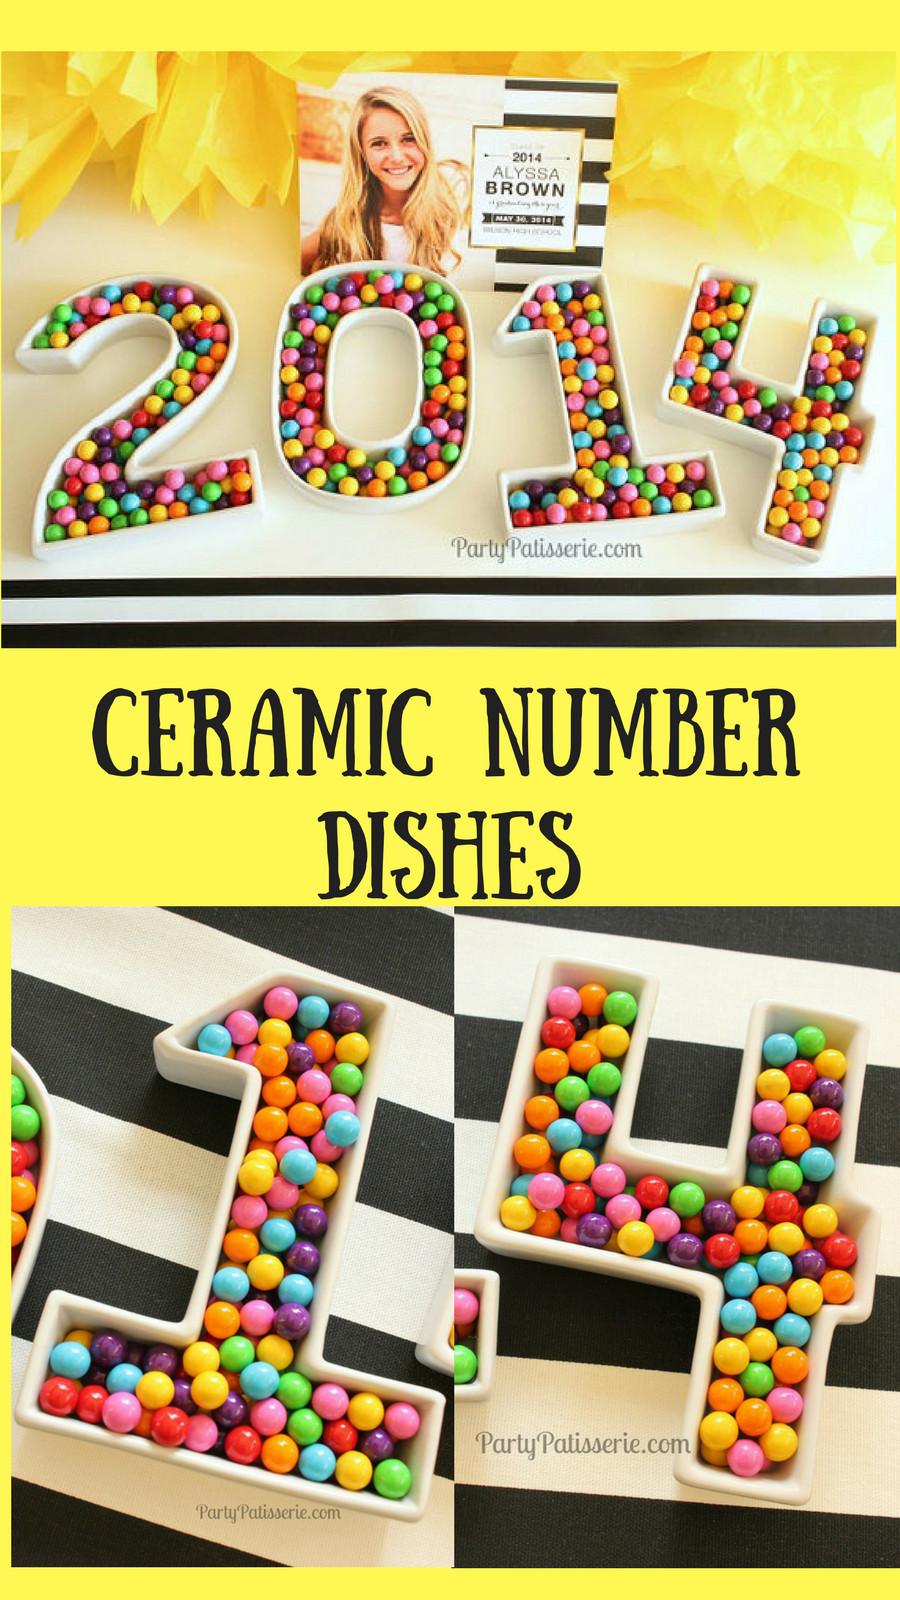 8Th Grade Graduation Gift Ideas For Him
 Adorable These ceramic number dishes would be perfect for